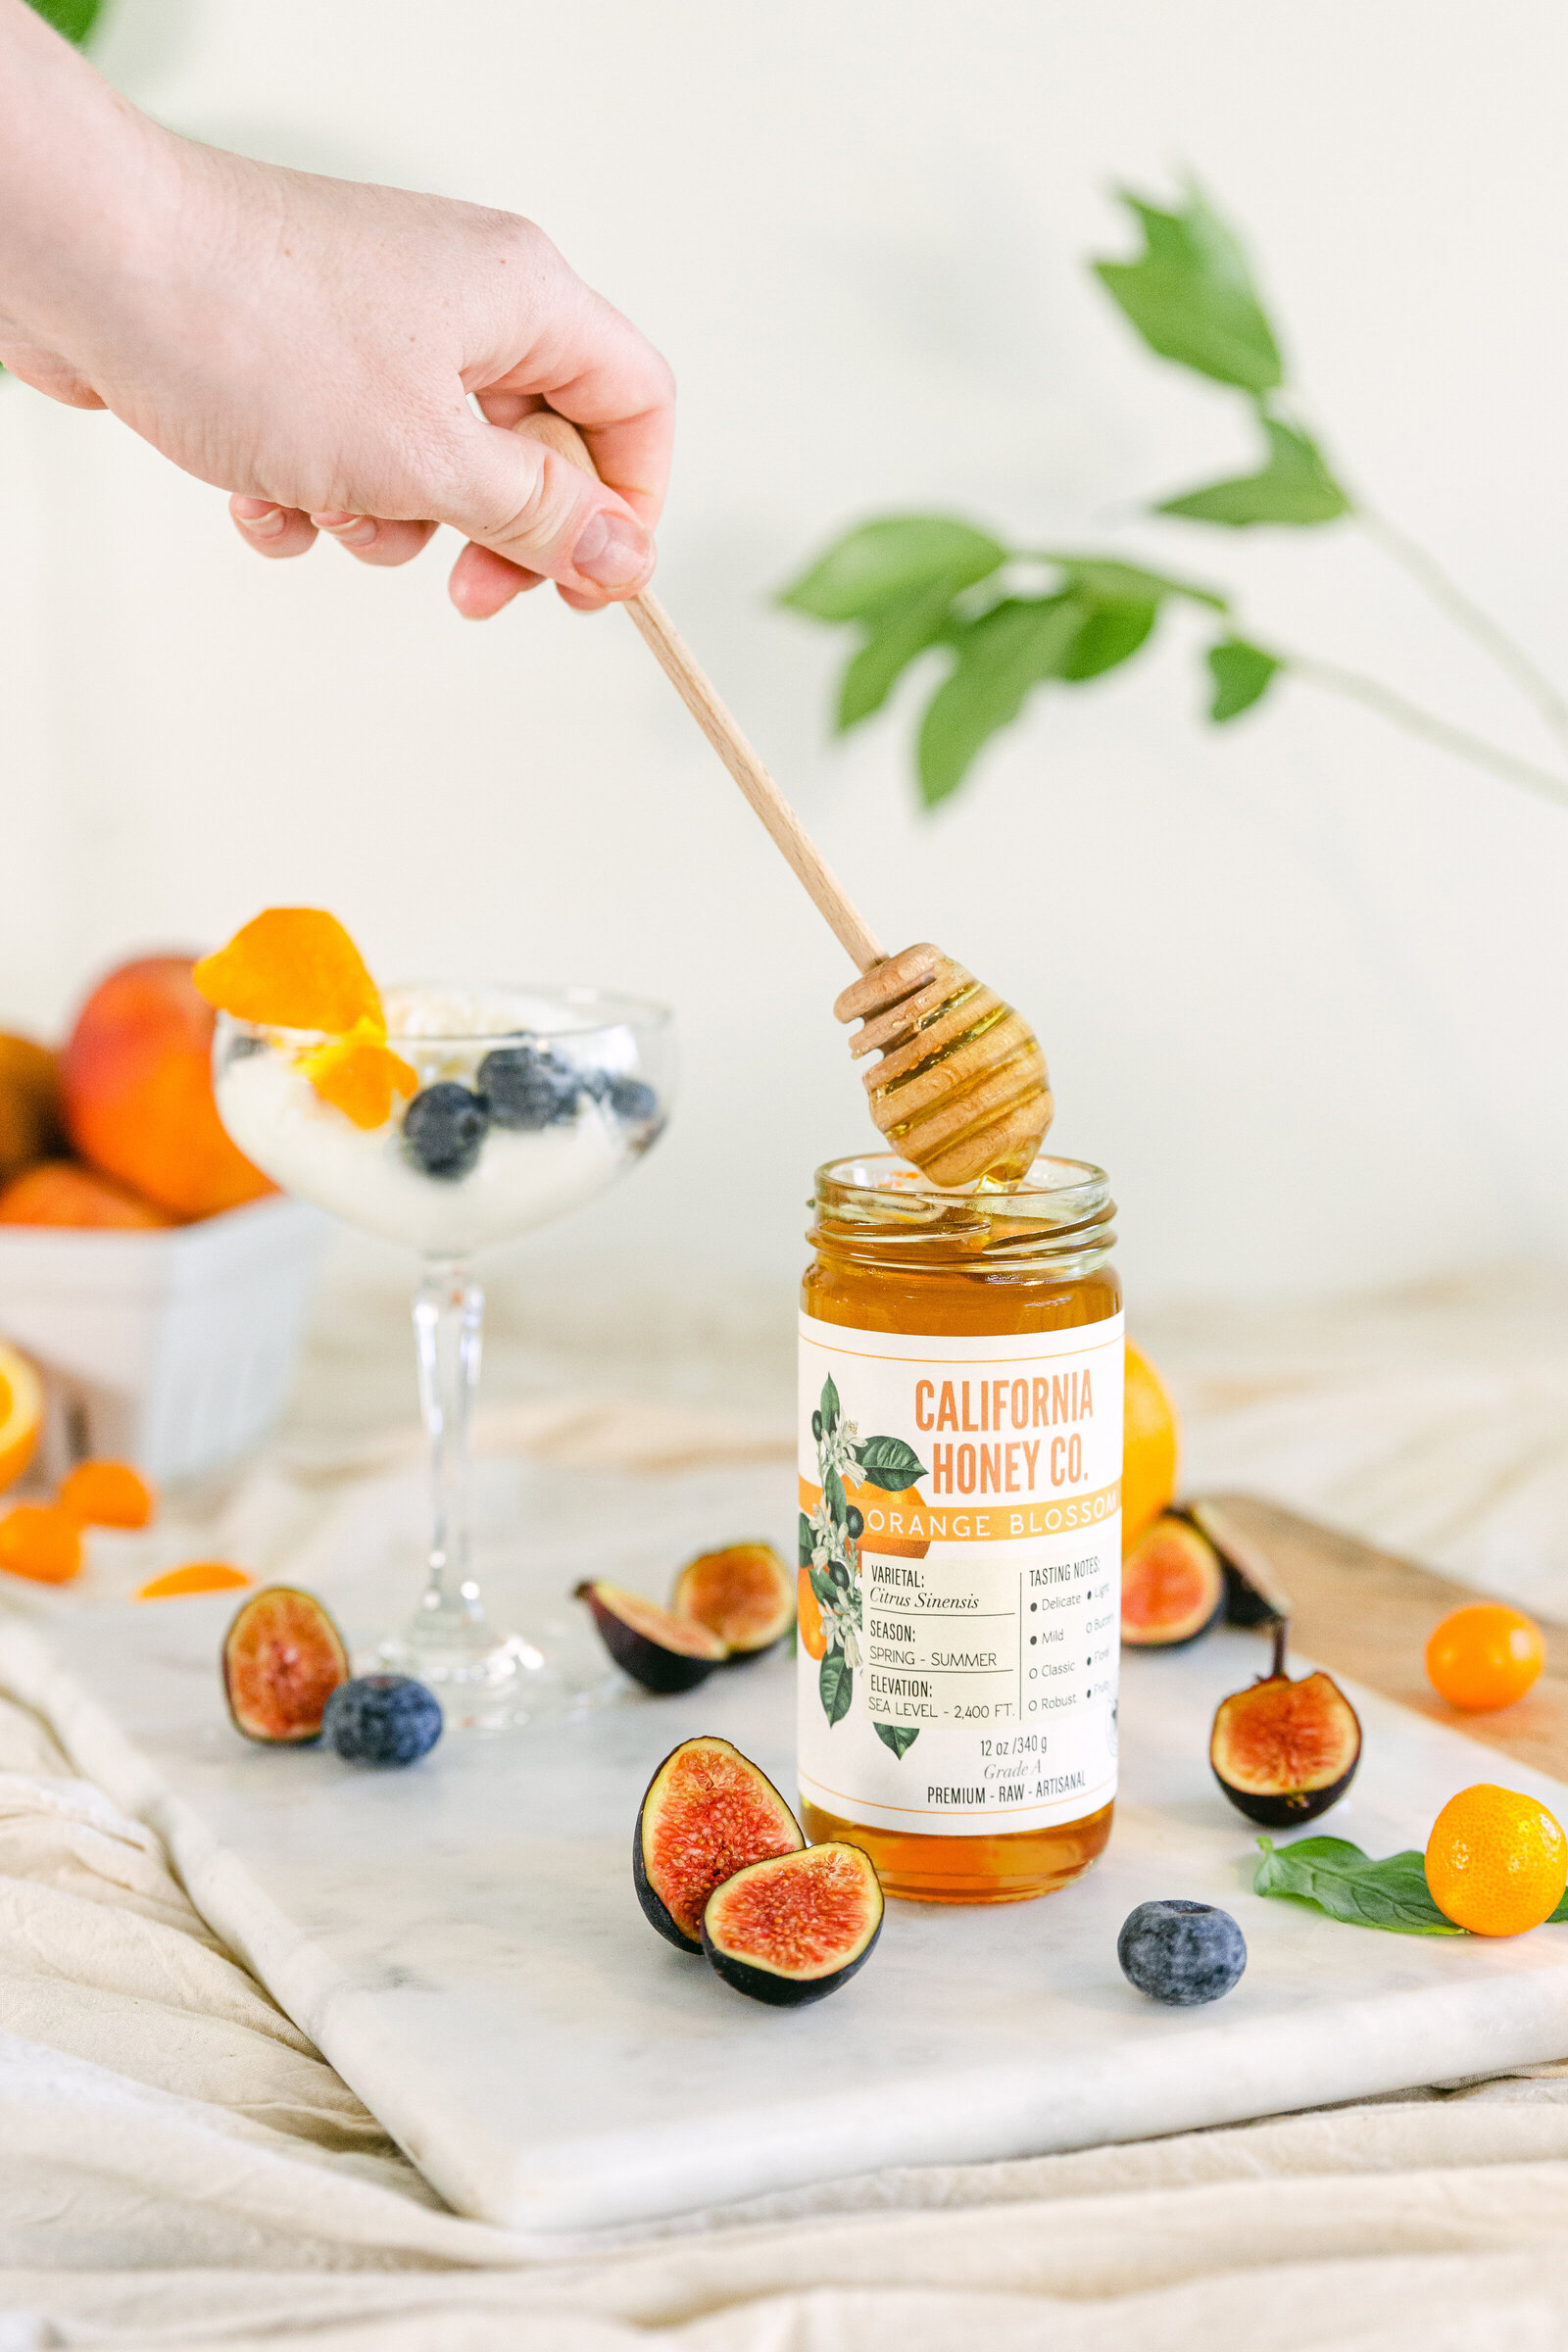 California honey co product photography styled food photography by Chelsea Loren